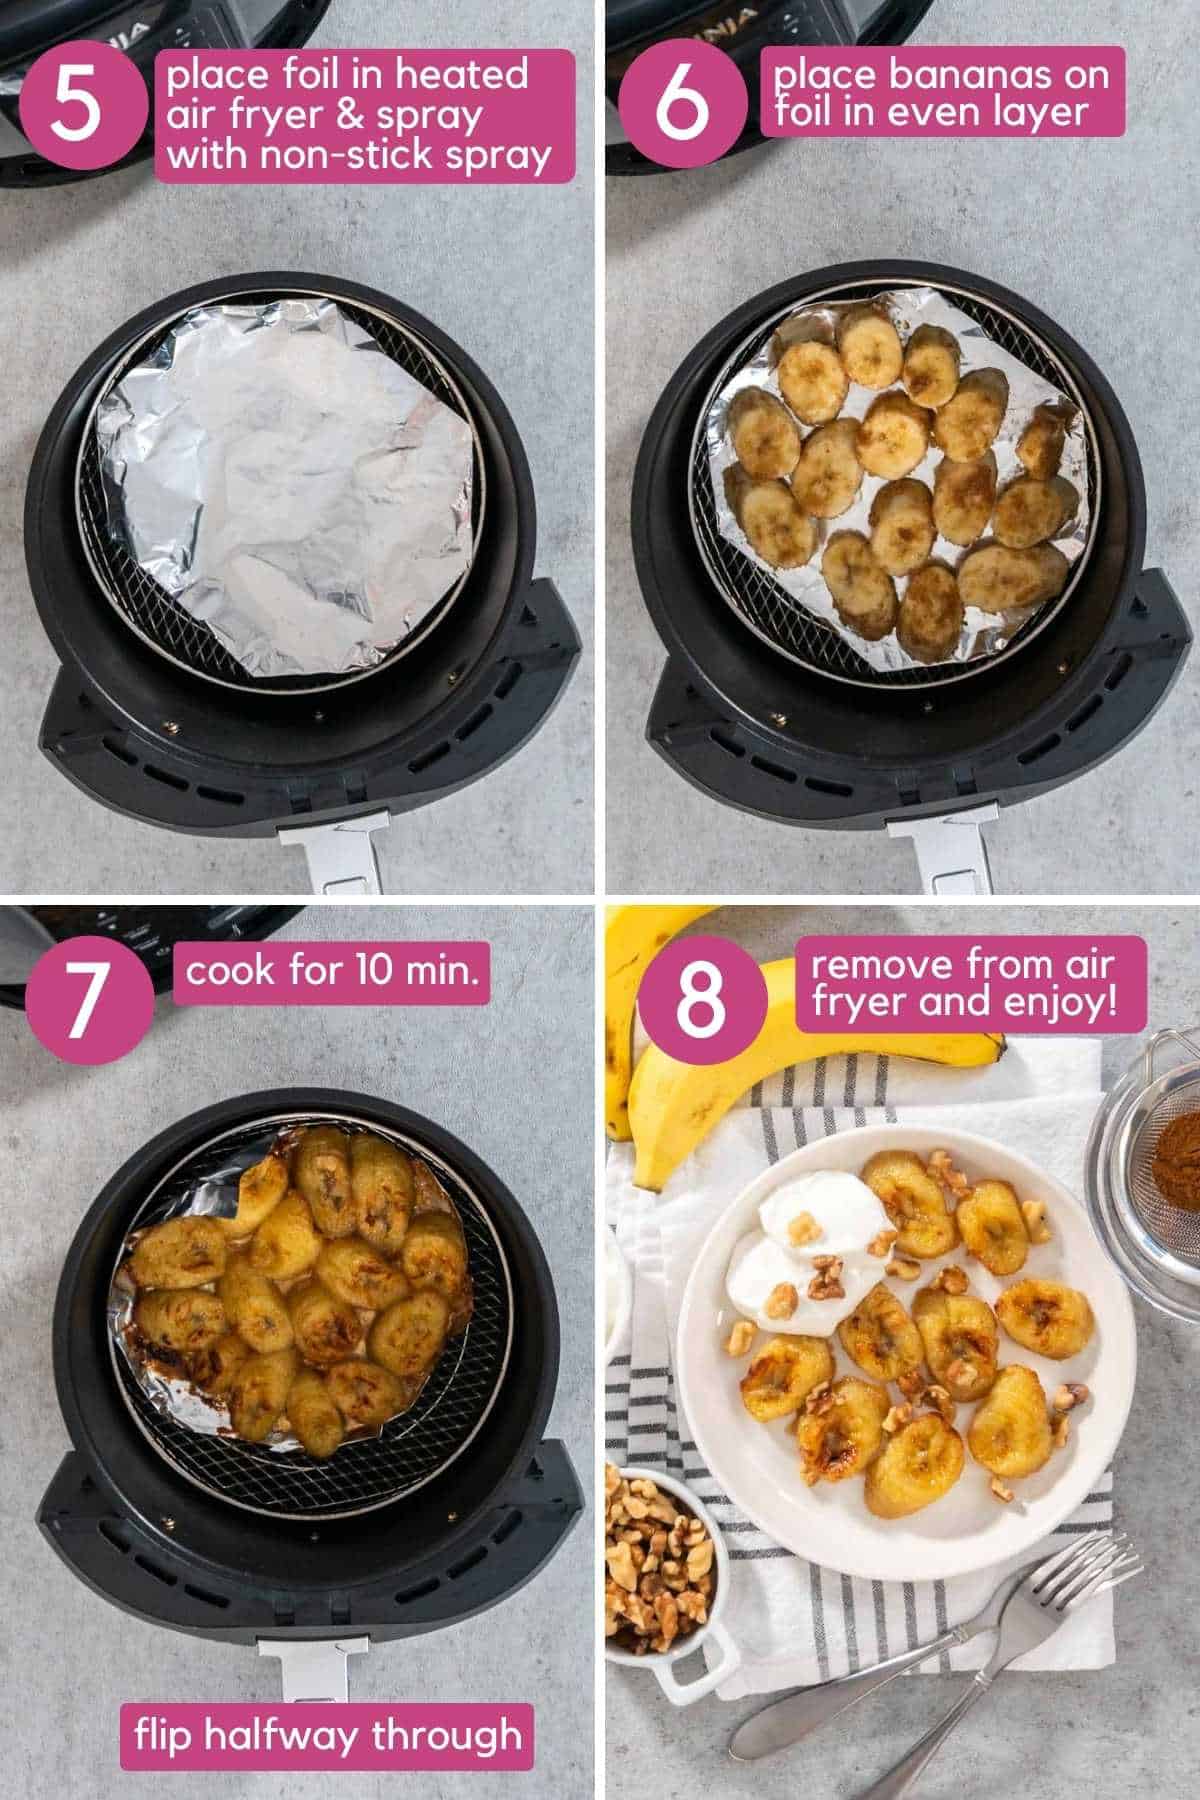 Adding bananas to an air fryer, and cooking them until caramelized.